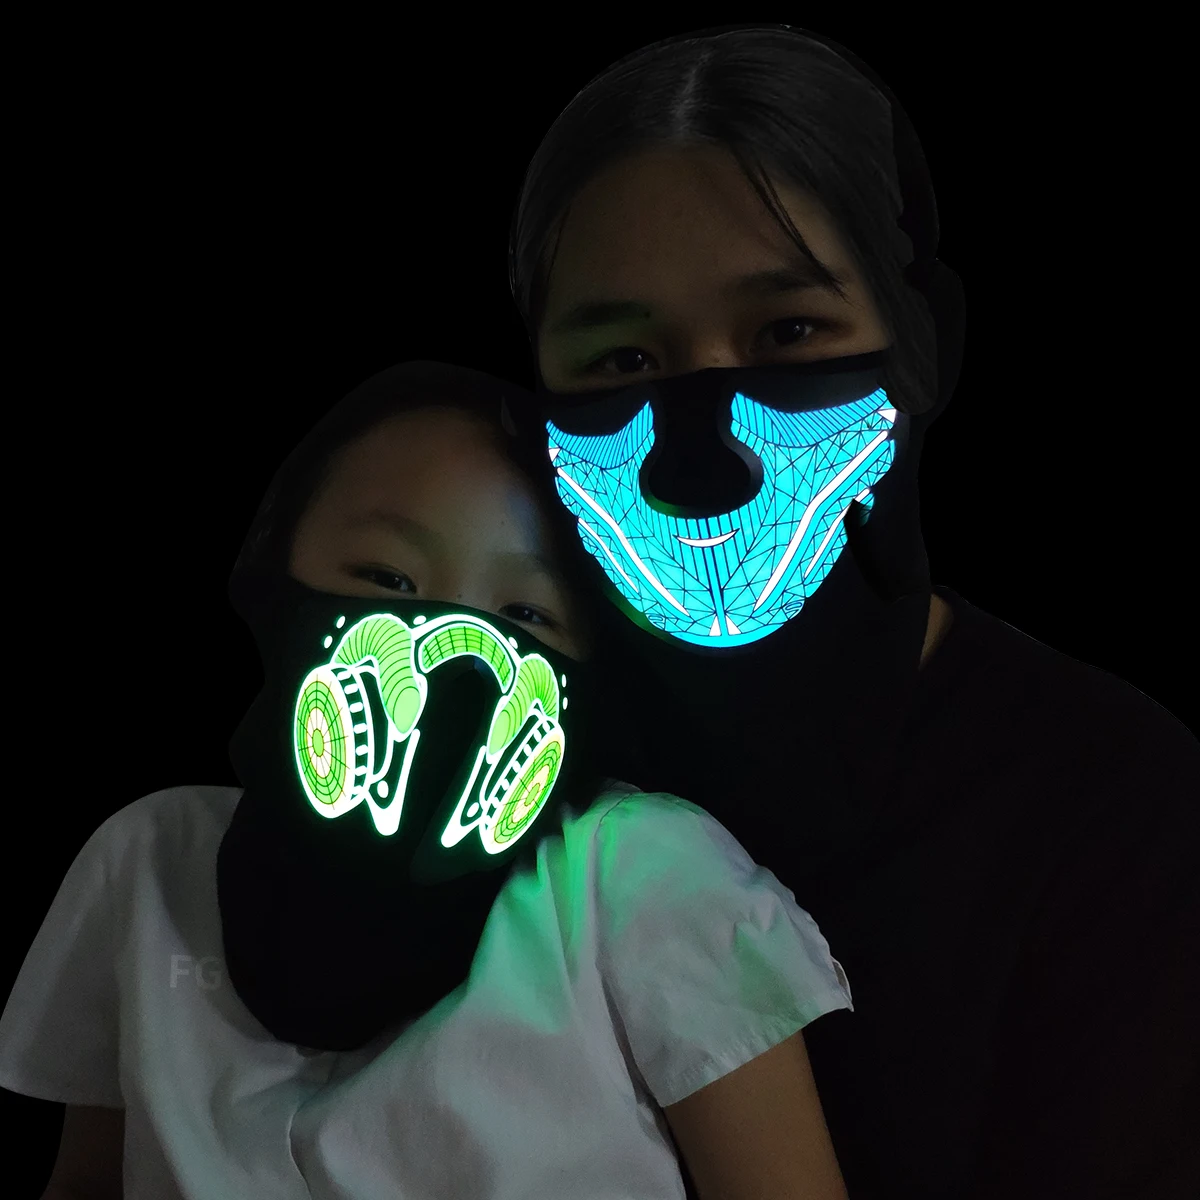 2 Piece Sound Activated Light Up Mask Led Music Party Mask Halloween Led Music Mask for Festival Party 